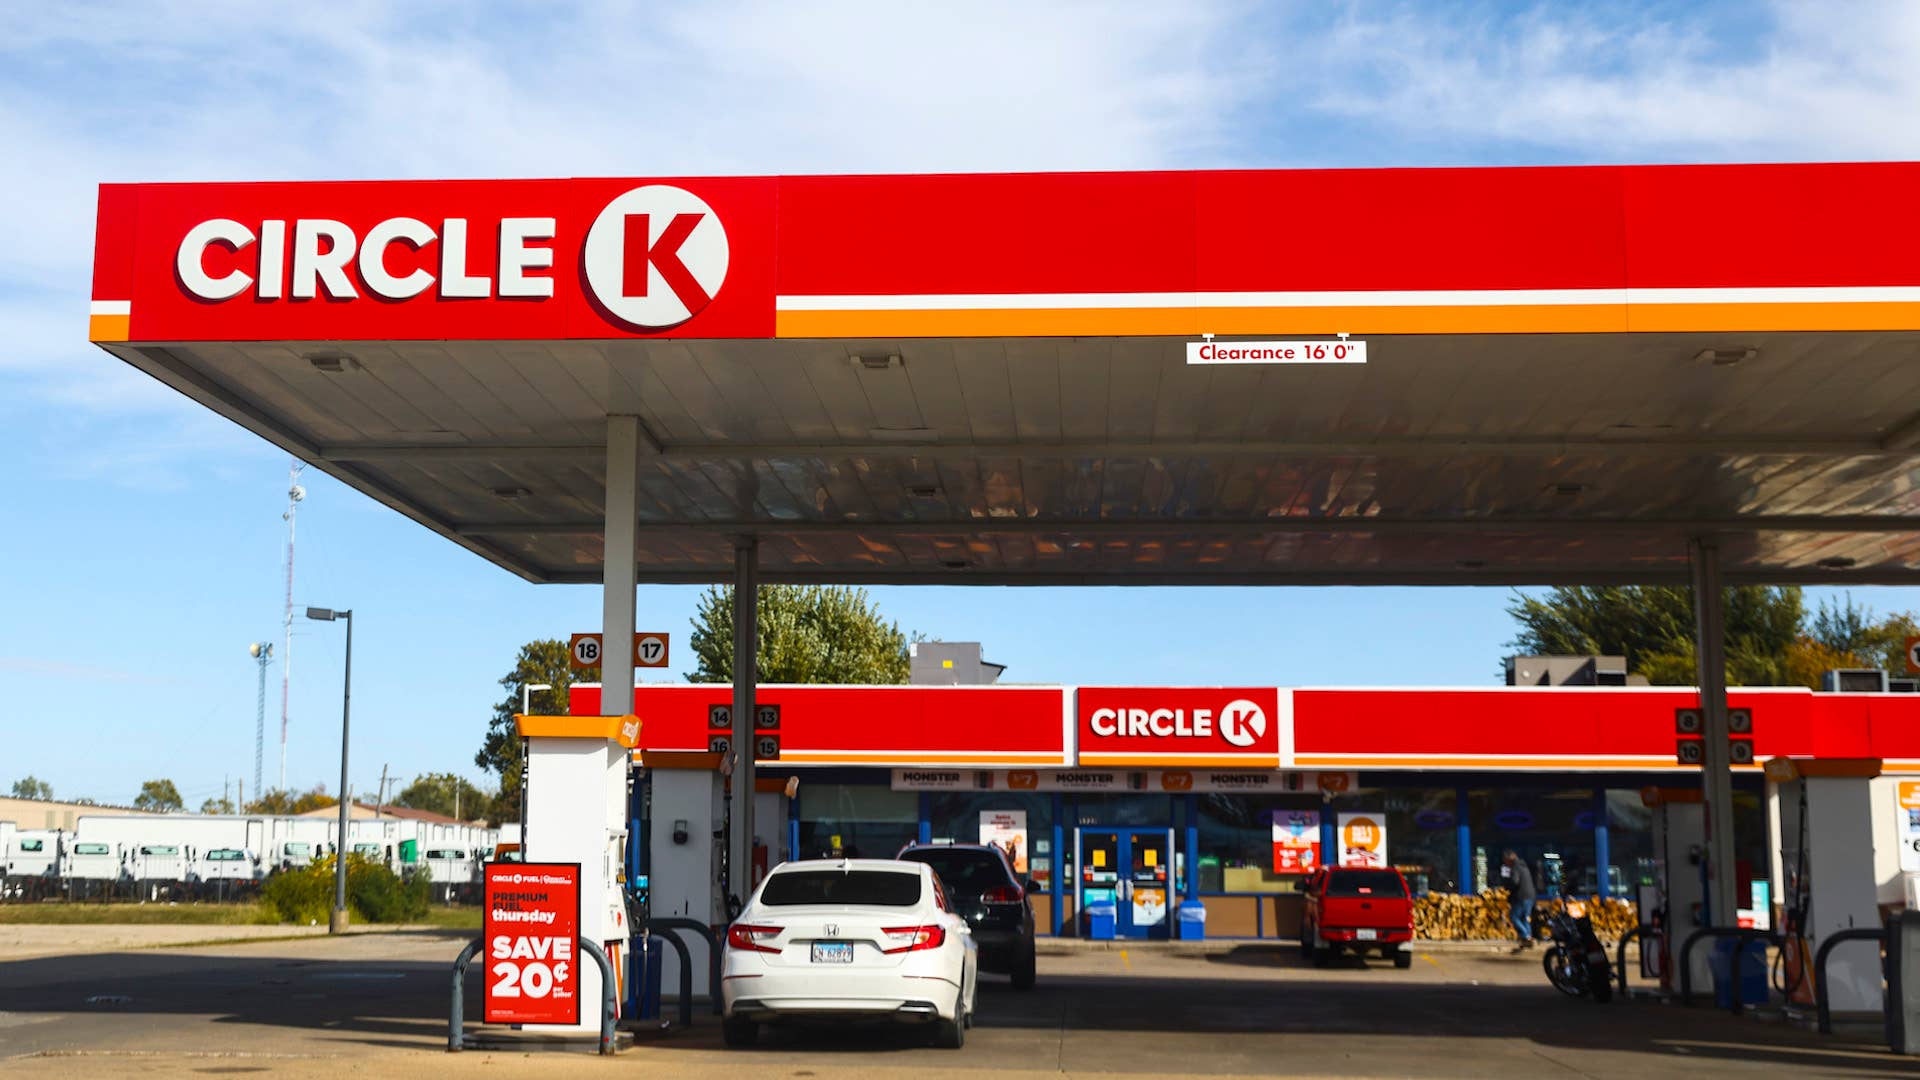 Circle K petrol station is seen in Illinois, United States